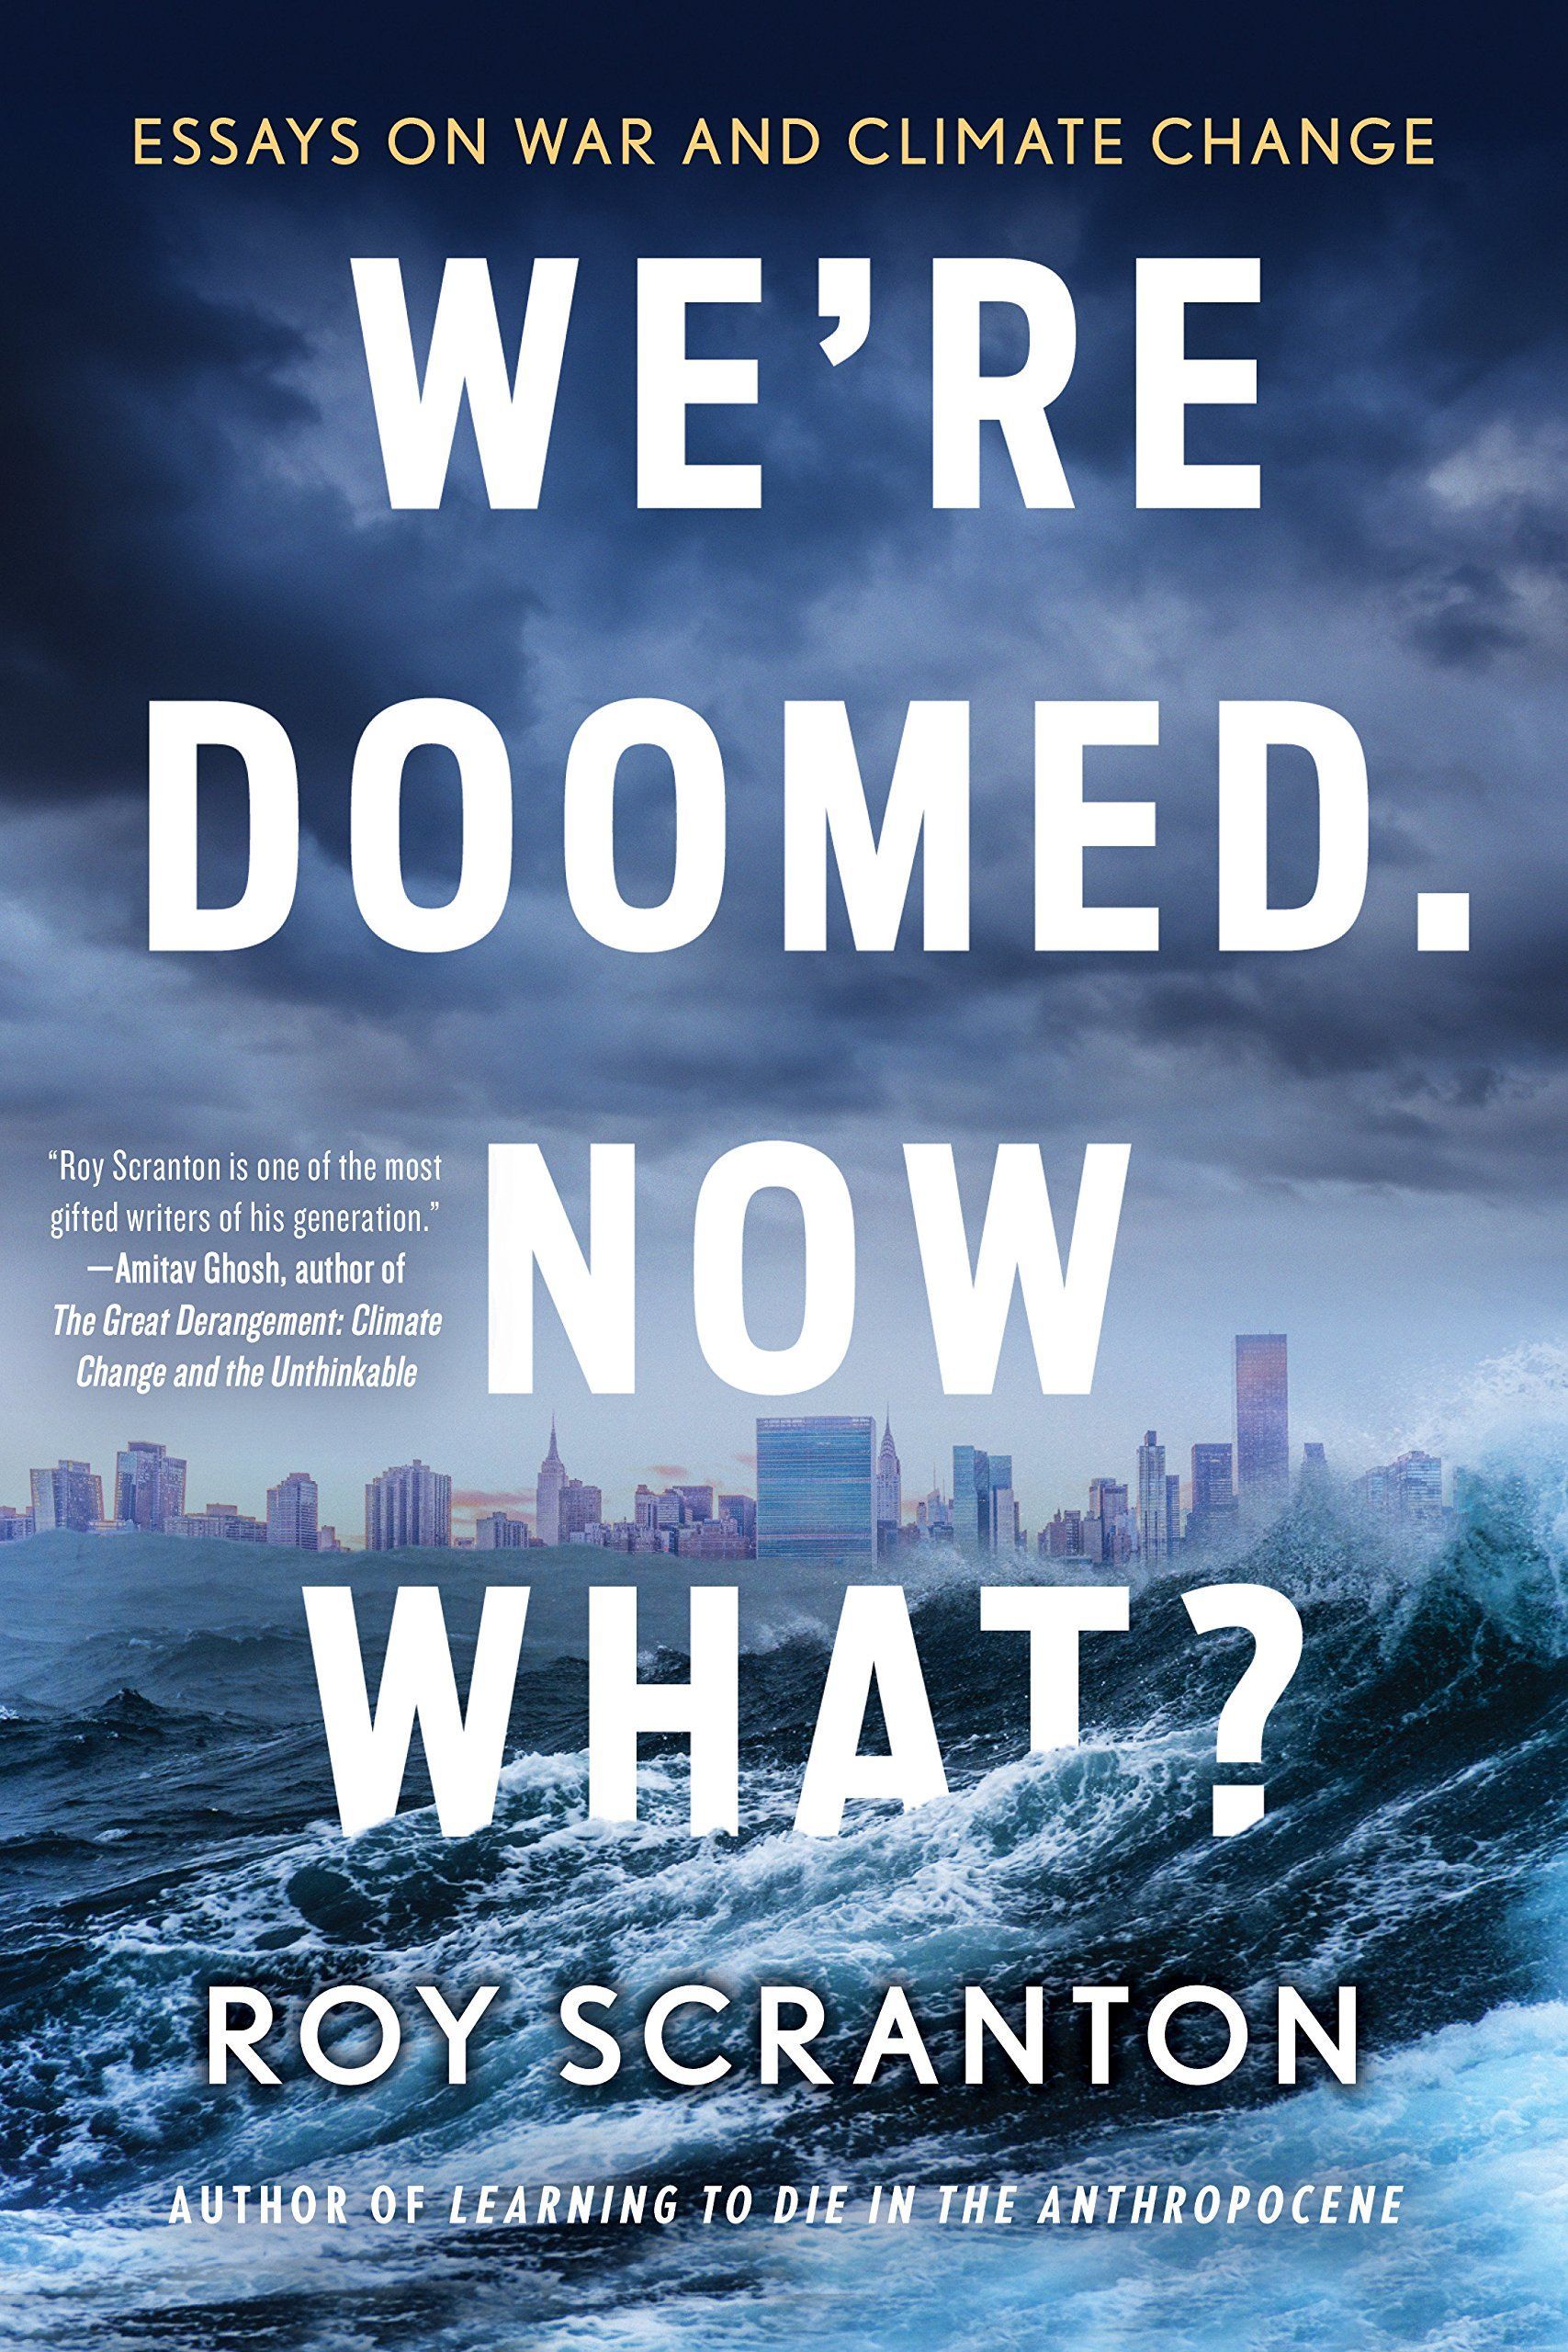 Frozen as the Oceans Rise: On “We’re Doomed. Now What?”